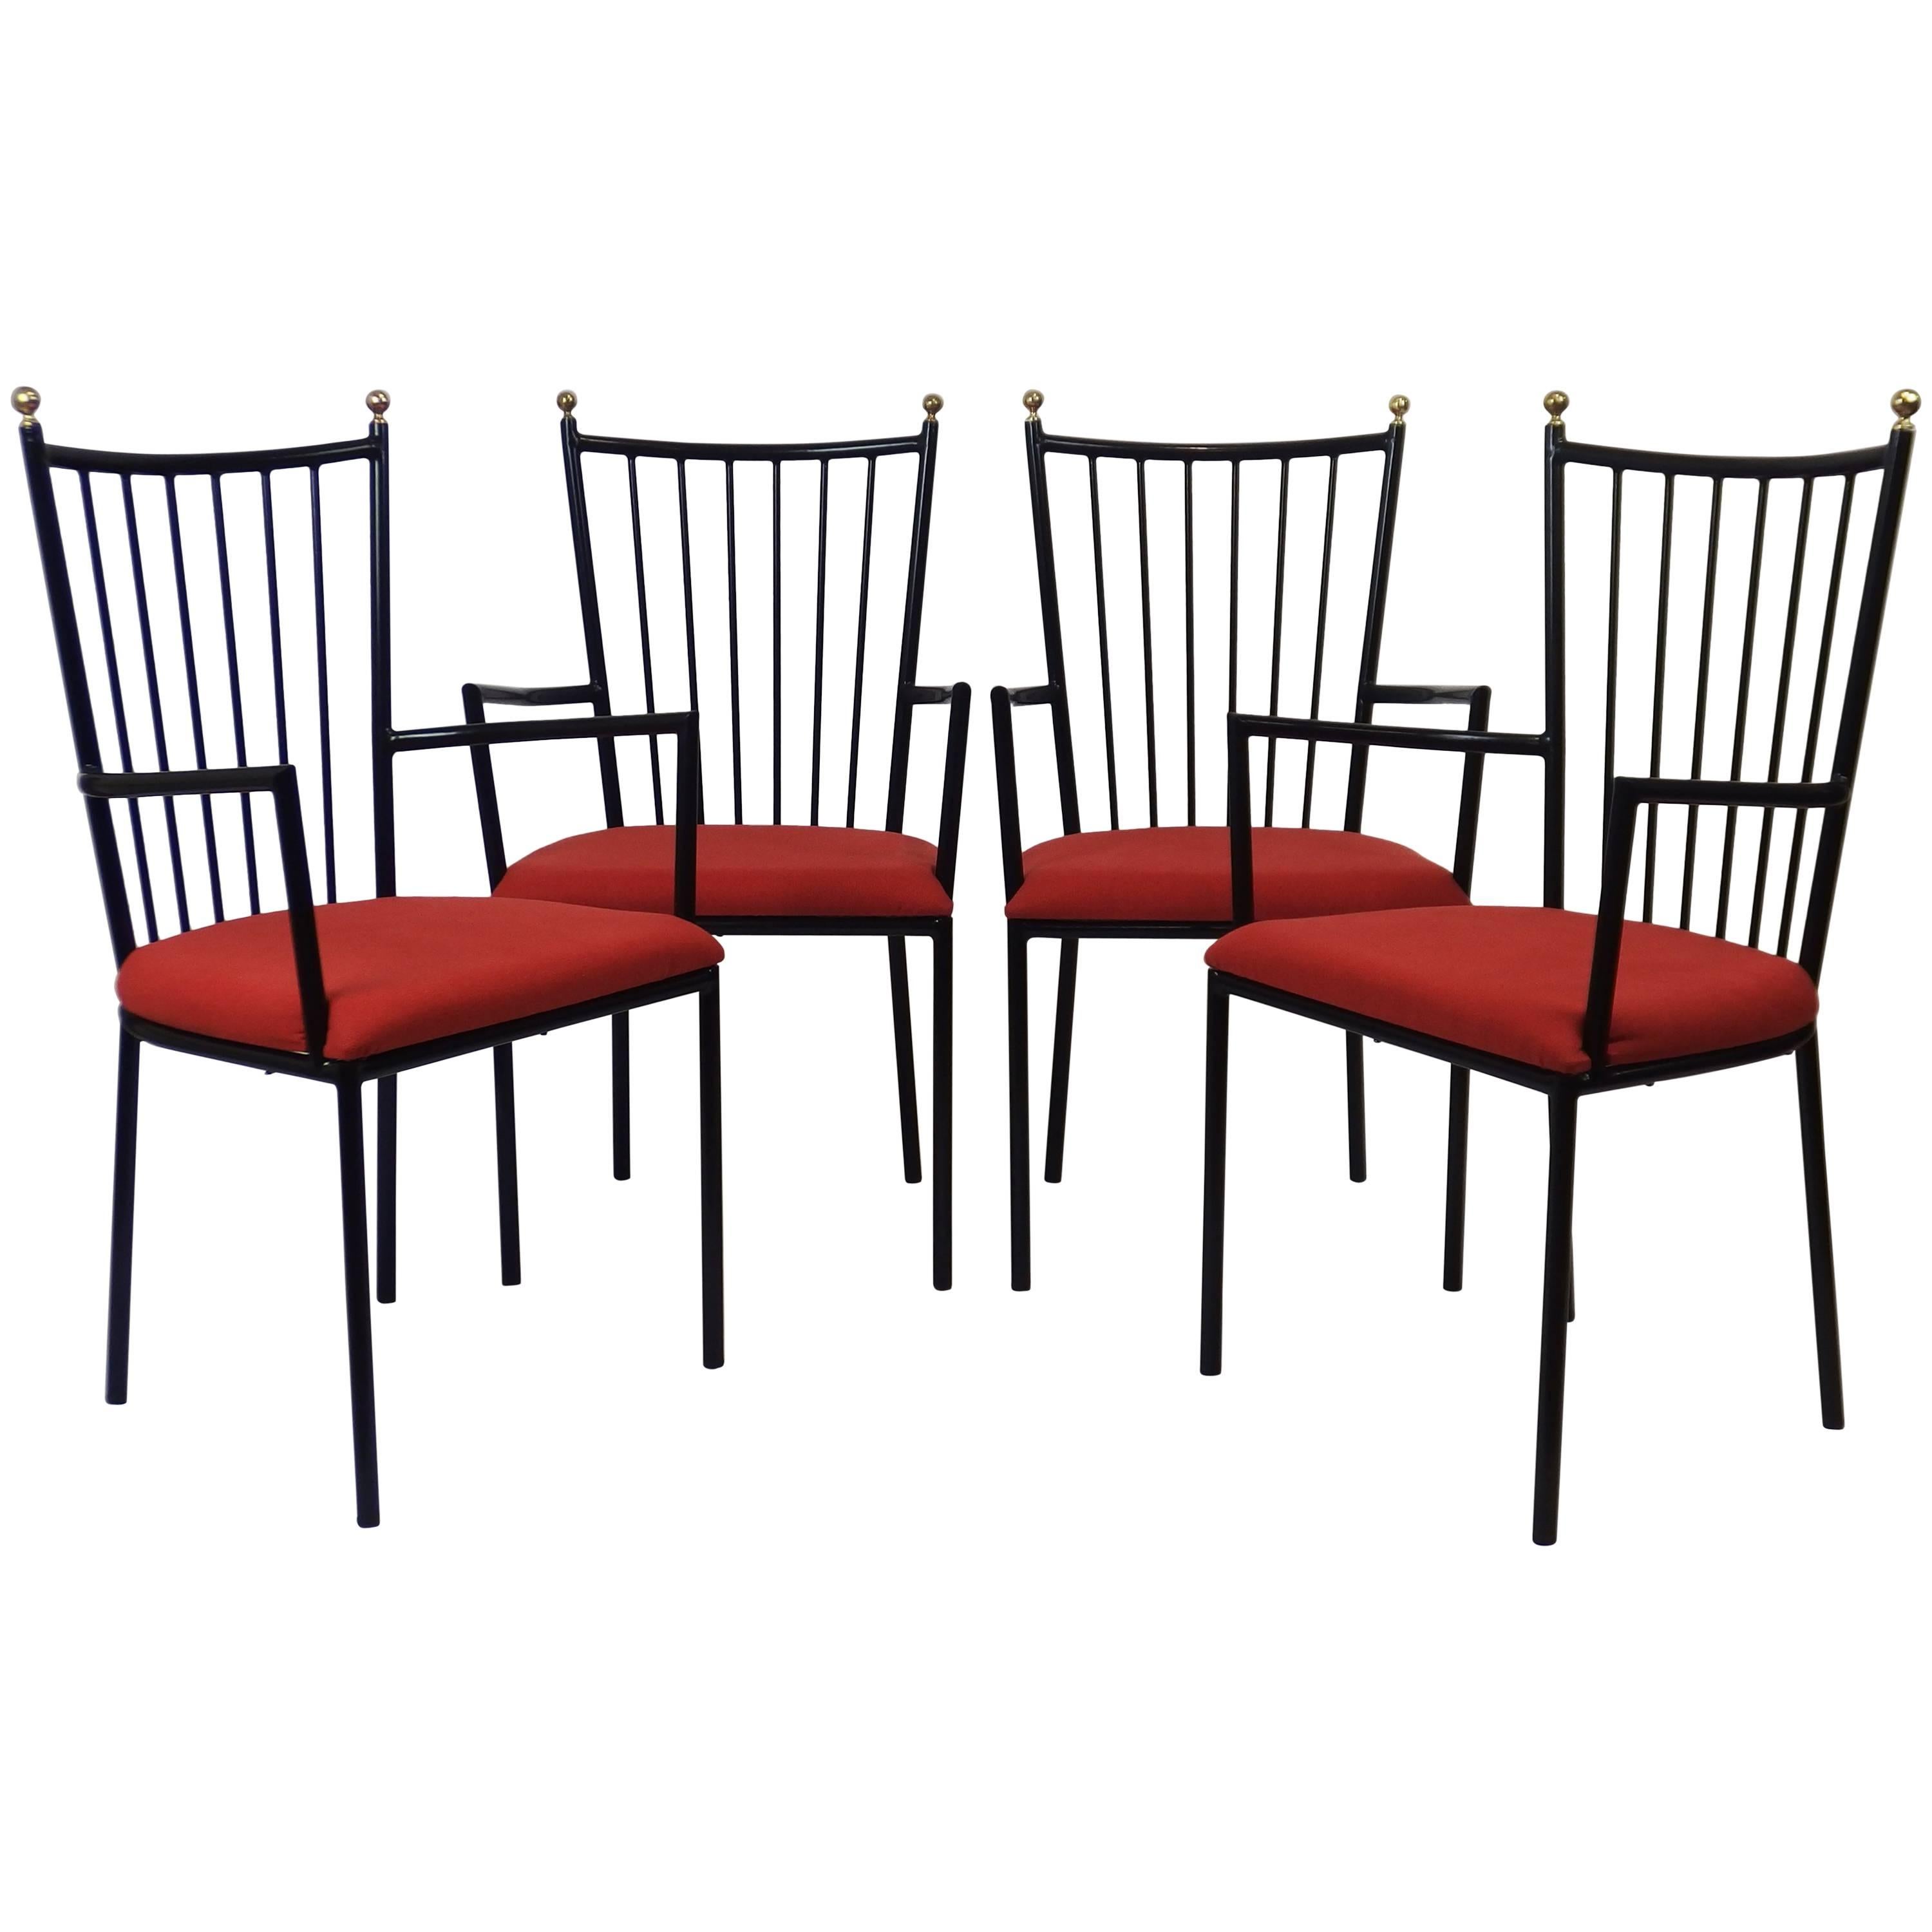 Set of Four Armchairs by Colette Gueden im Angebot